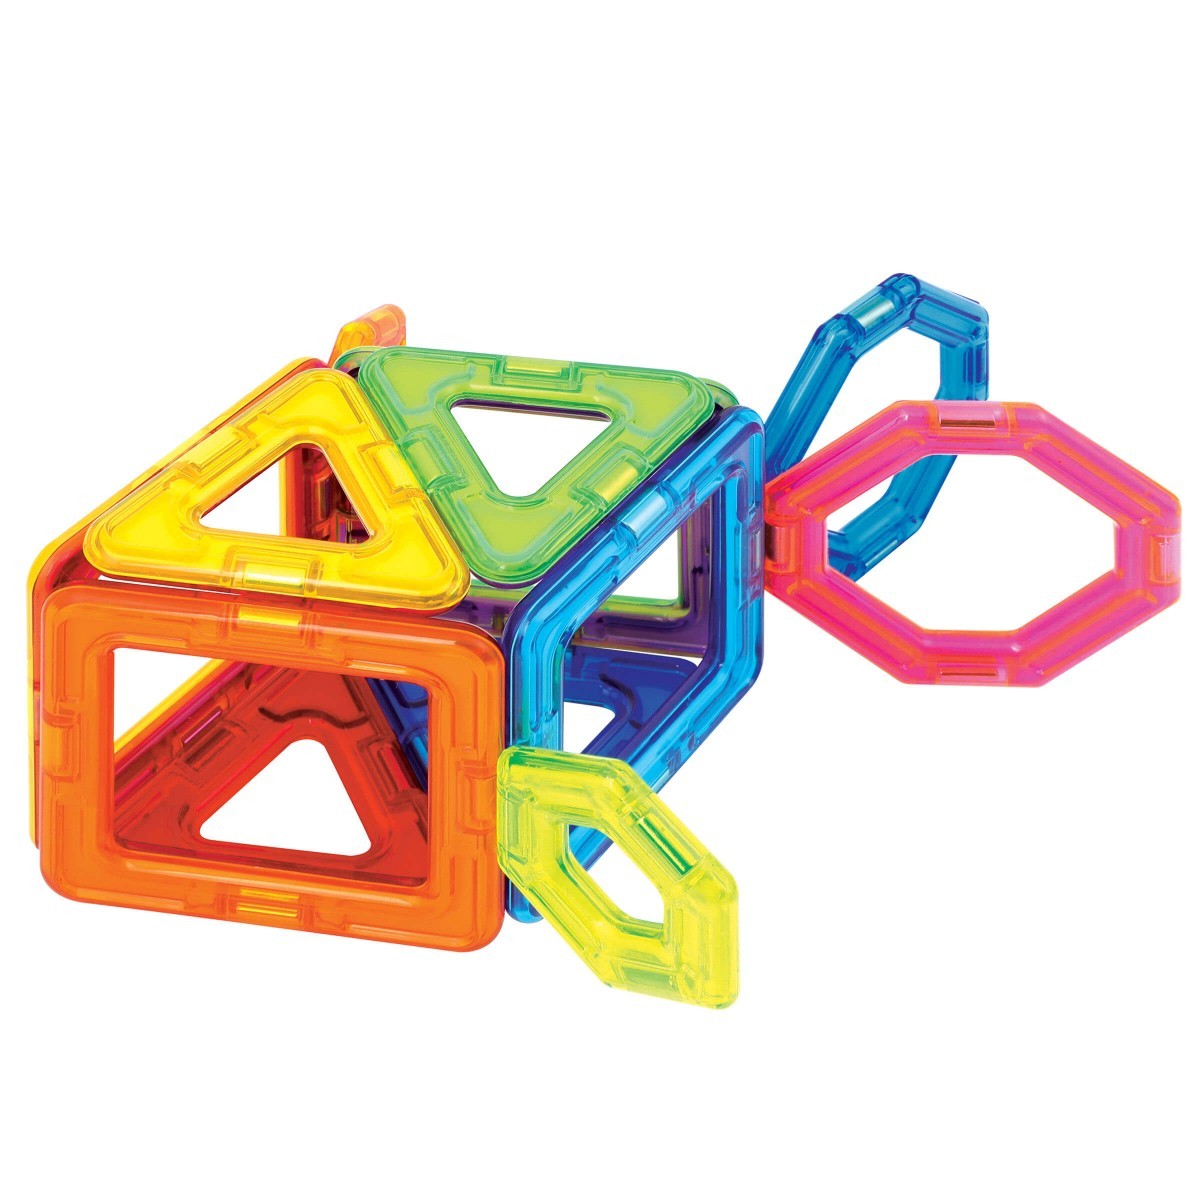 Magformers Challenge 14 Advanced Construction at Toys UK Set Piece Magnetic R Us